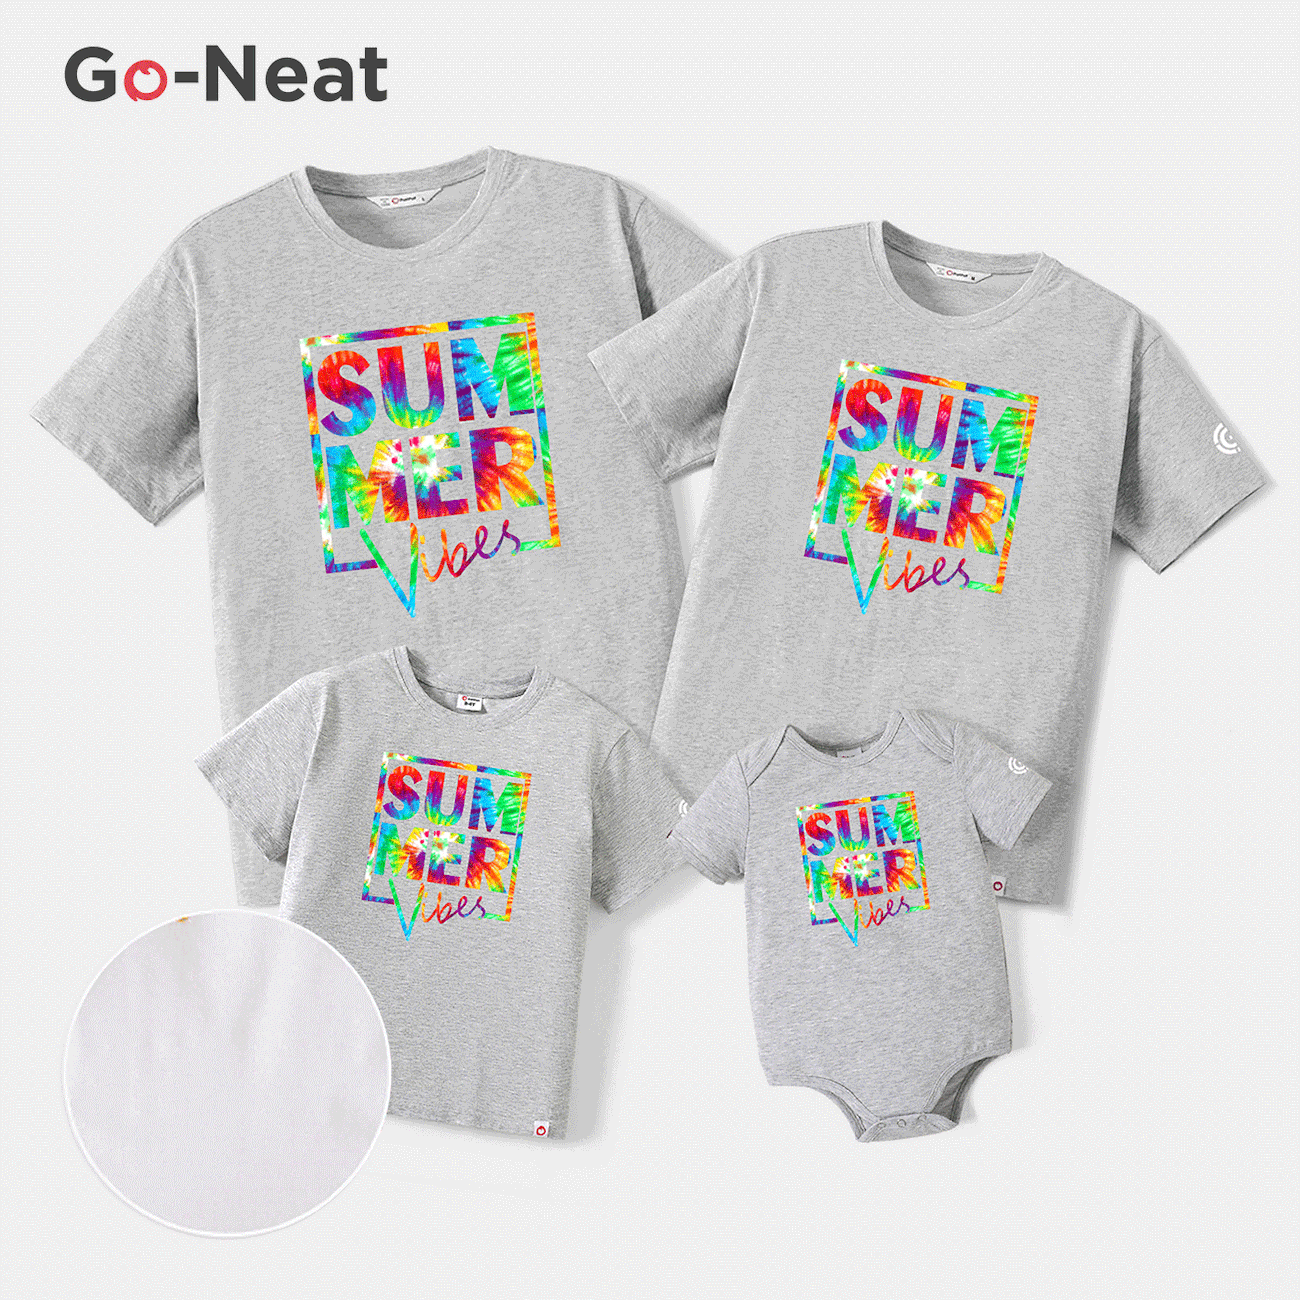 Go-Neat Water Repellent and Stain Resistant Family Matching Colorful Letter Print Short-sleeve Tee Light Grey big image 1